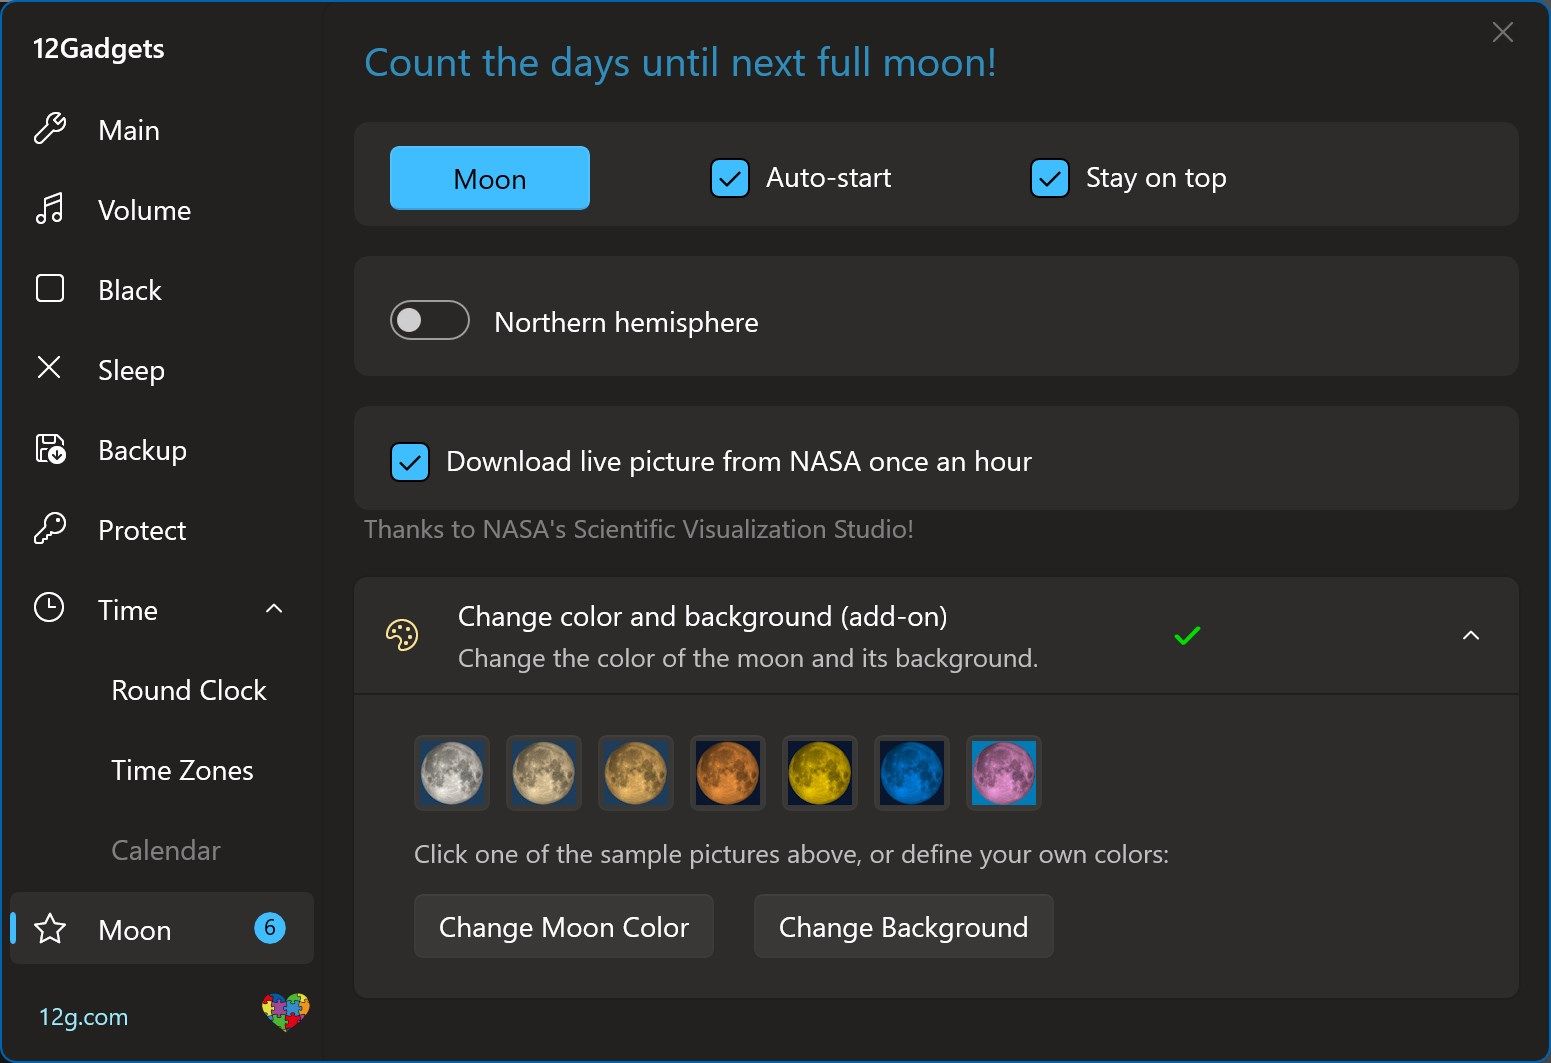 change color of moon (add-on)